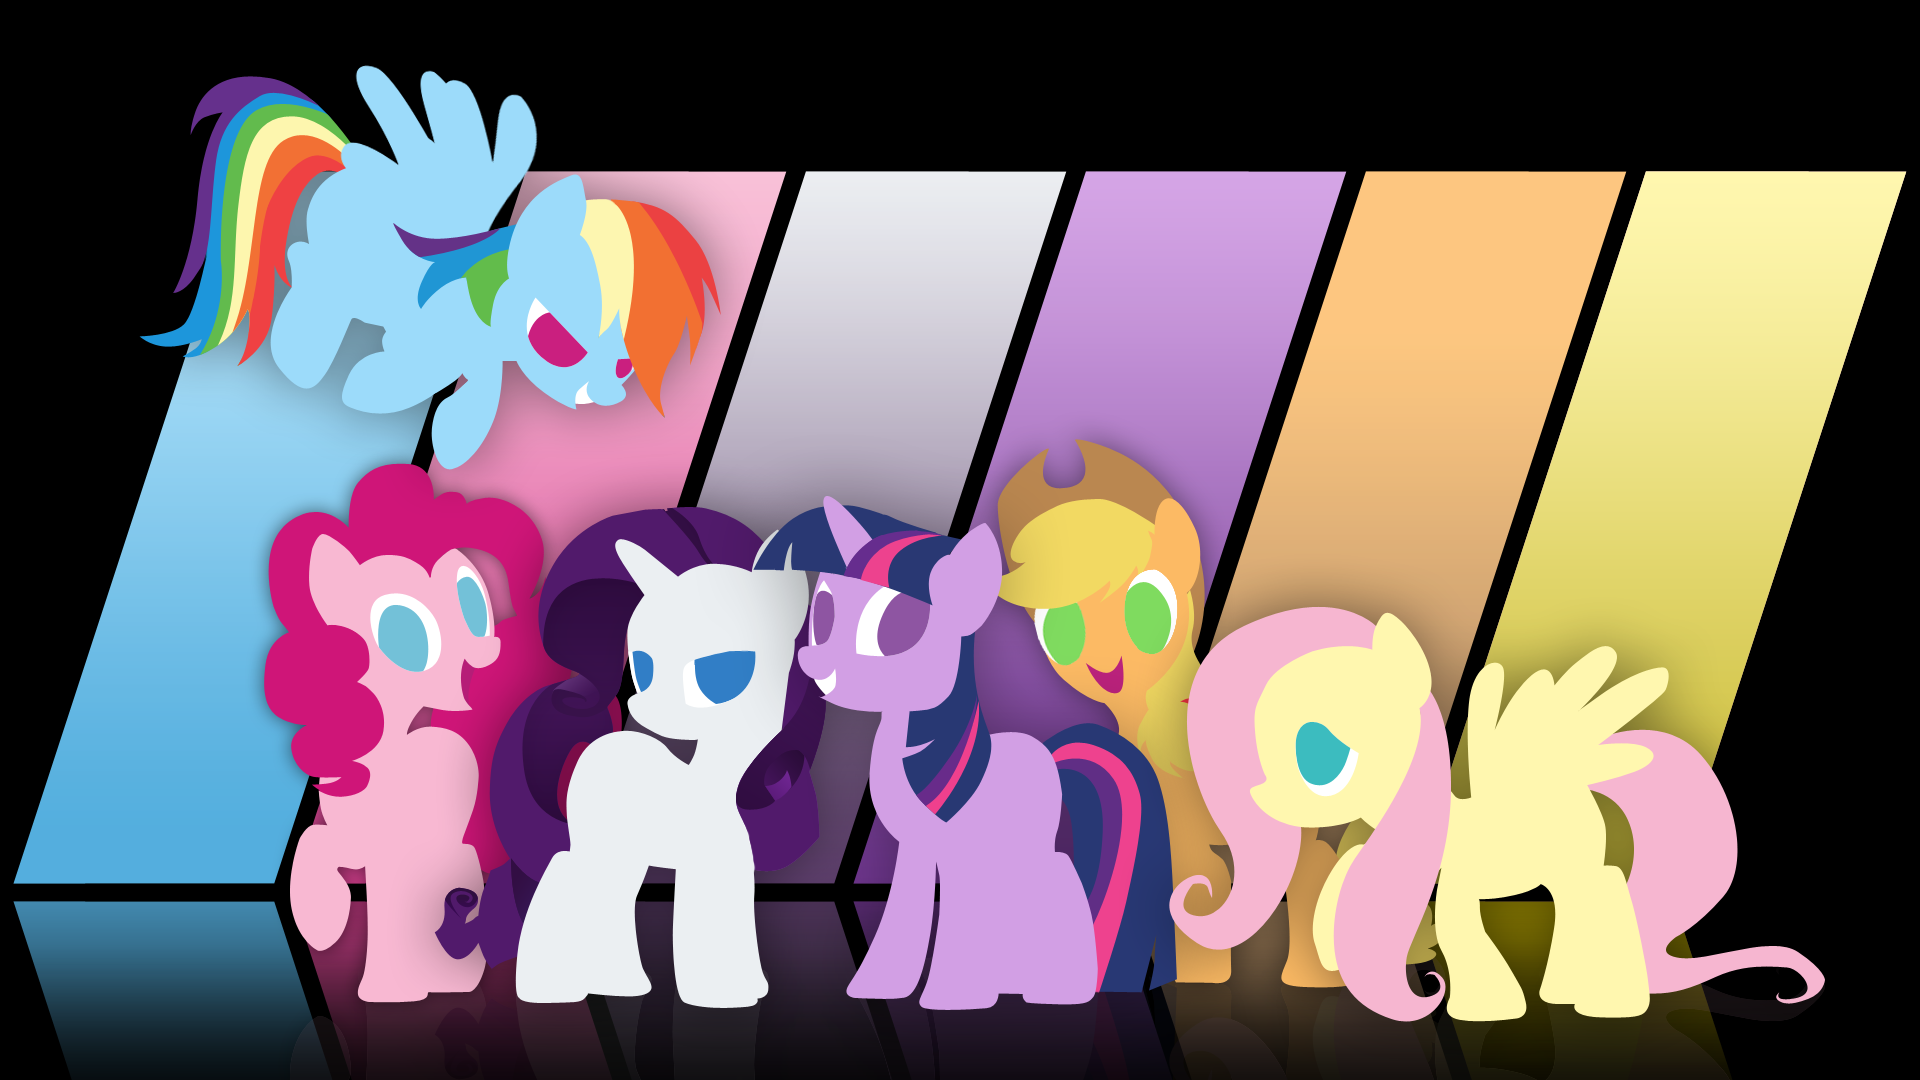 All together now! by Zoofie